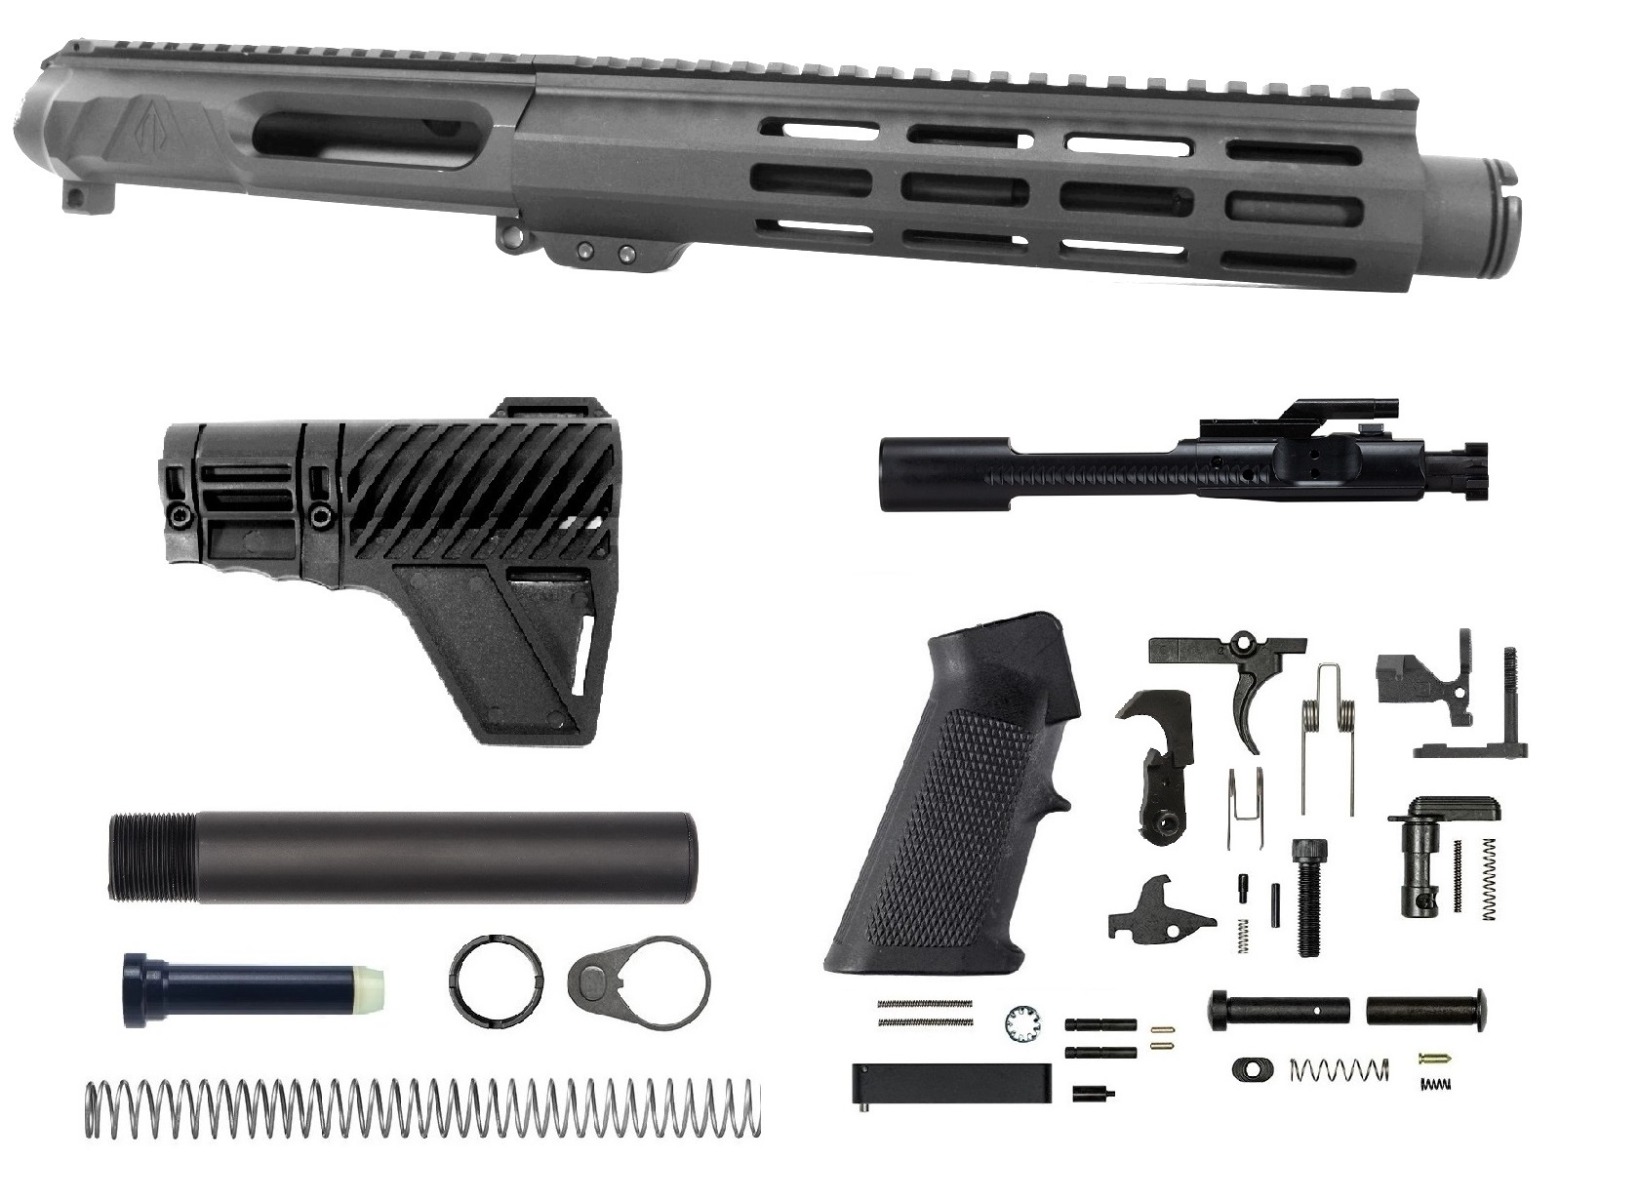 7.5 inch AR-15 NR Side Charging 5.56 NATO Nitride Upper w/Can Complete Kit | Pro2a Tactical